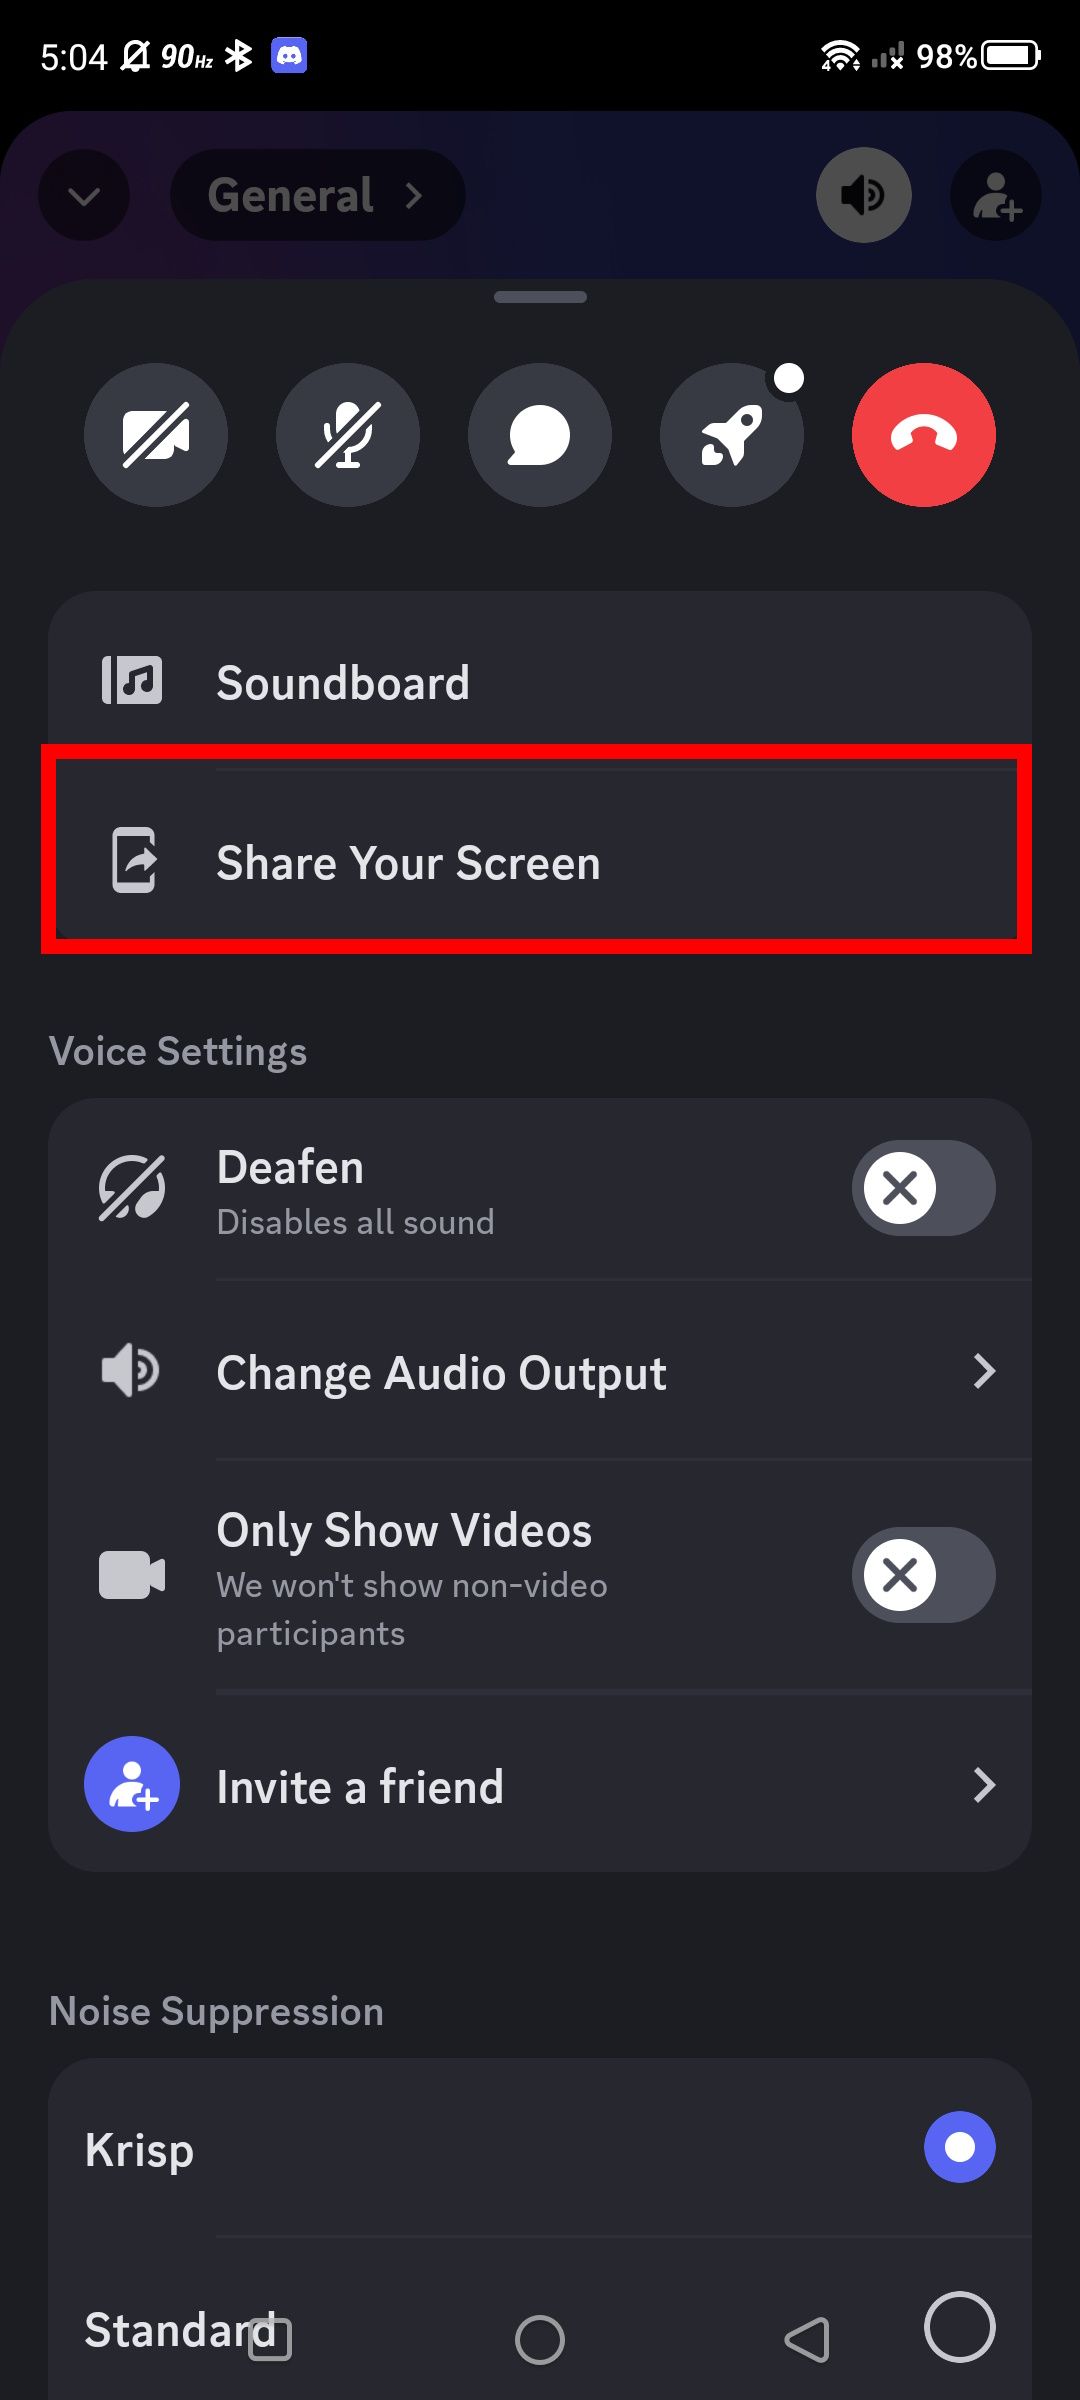 red rectangle outline over share your screen button on discord mobile